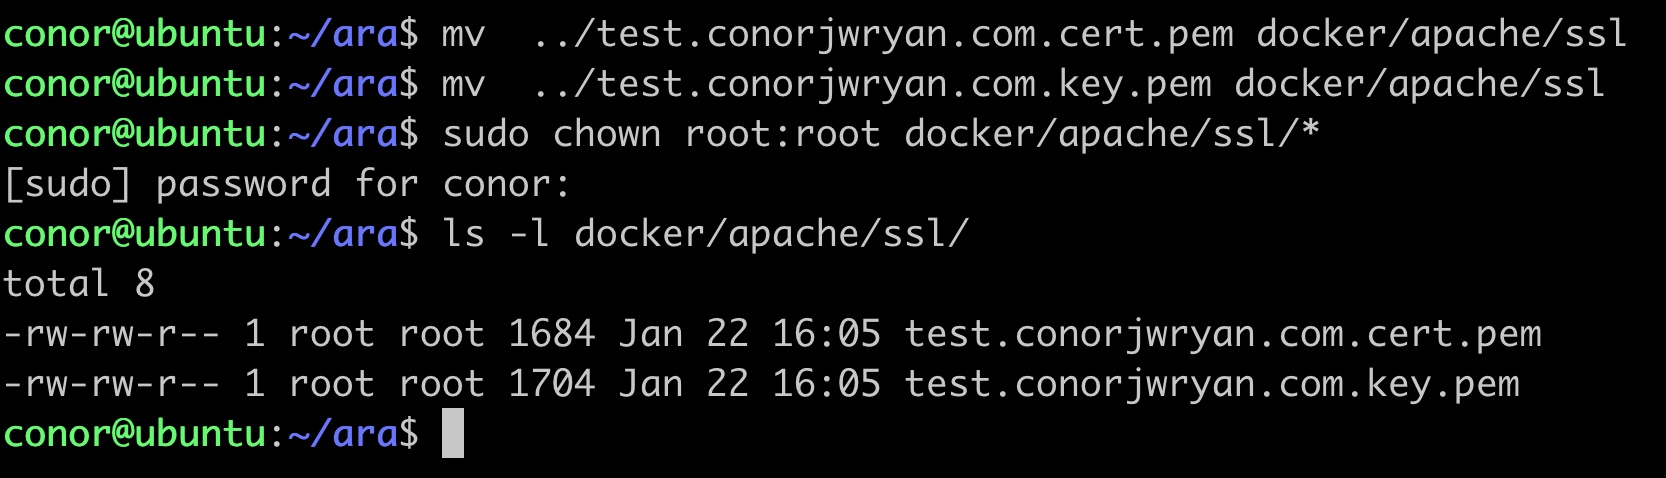 A screenshot of the terminal showing the output of 'ls -l docker/apache/ssl' showing the ownership and contents of the ssl directory after putting the certificates in there